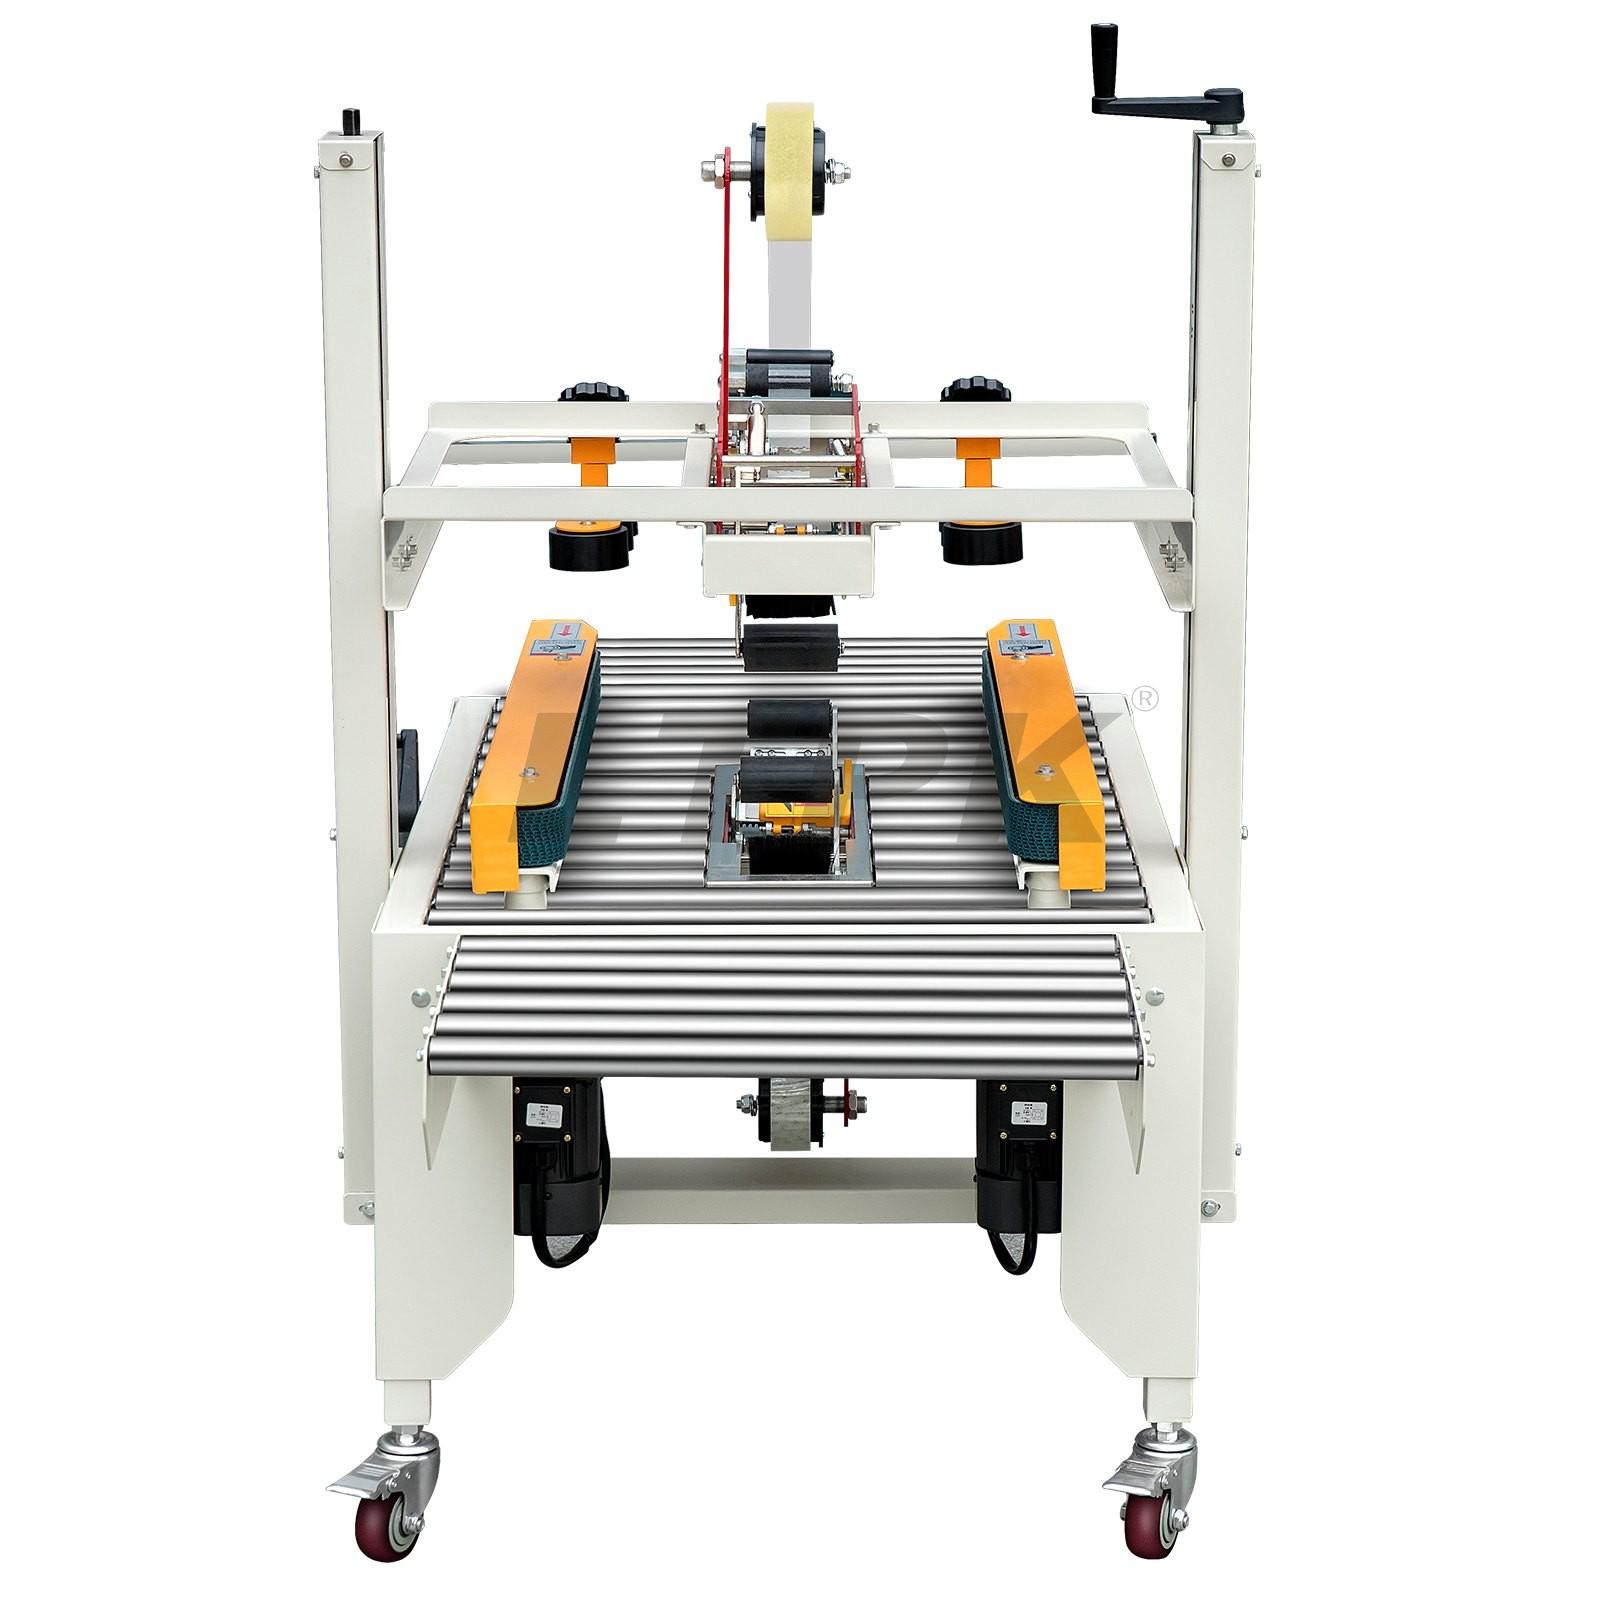 FXJ-5050 Carton Taping Machine with Four Rolls of Tape